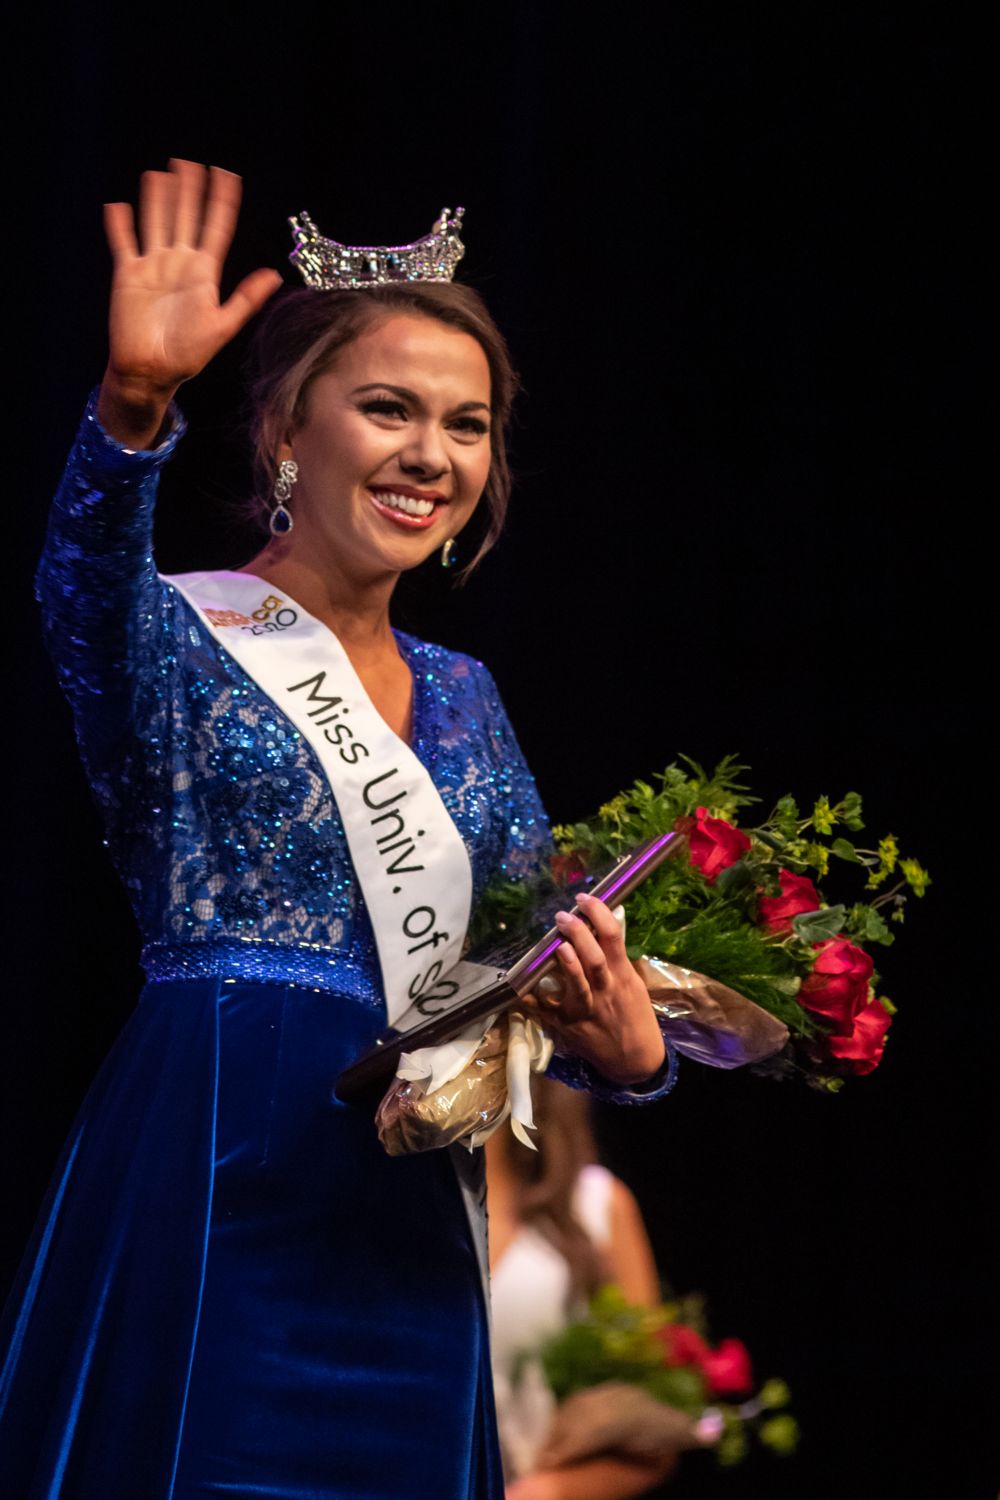 Vivian O’Neal will represent USM at the Miss Mississippi Pageant in Vicksburg in 2020 after being crowned Miss University of Southern Mississippi (Photo by Kelly Dunn)